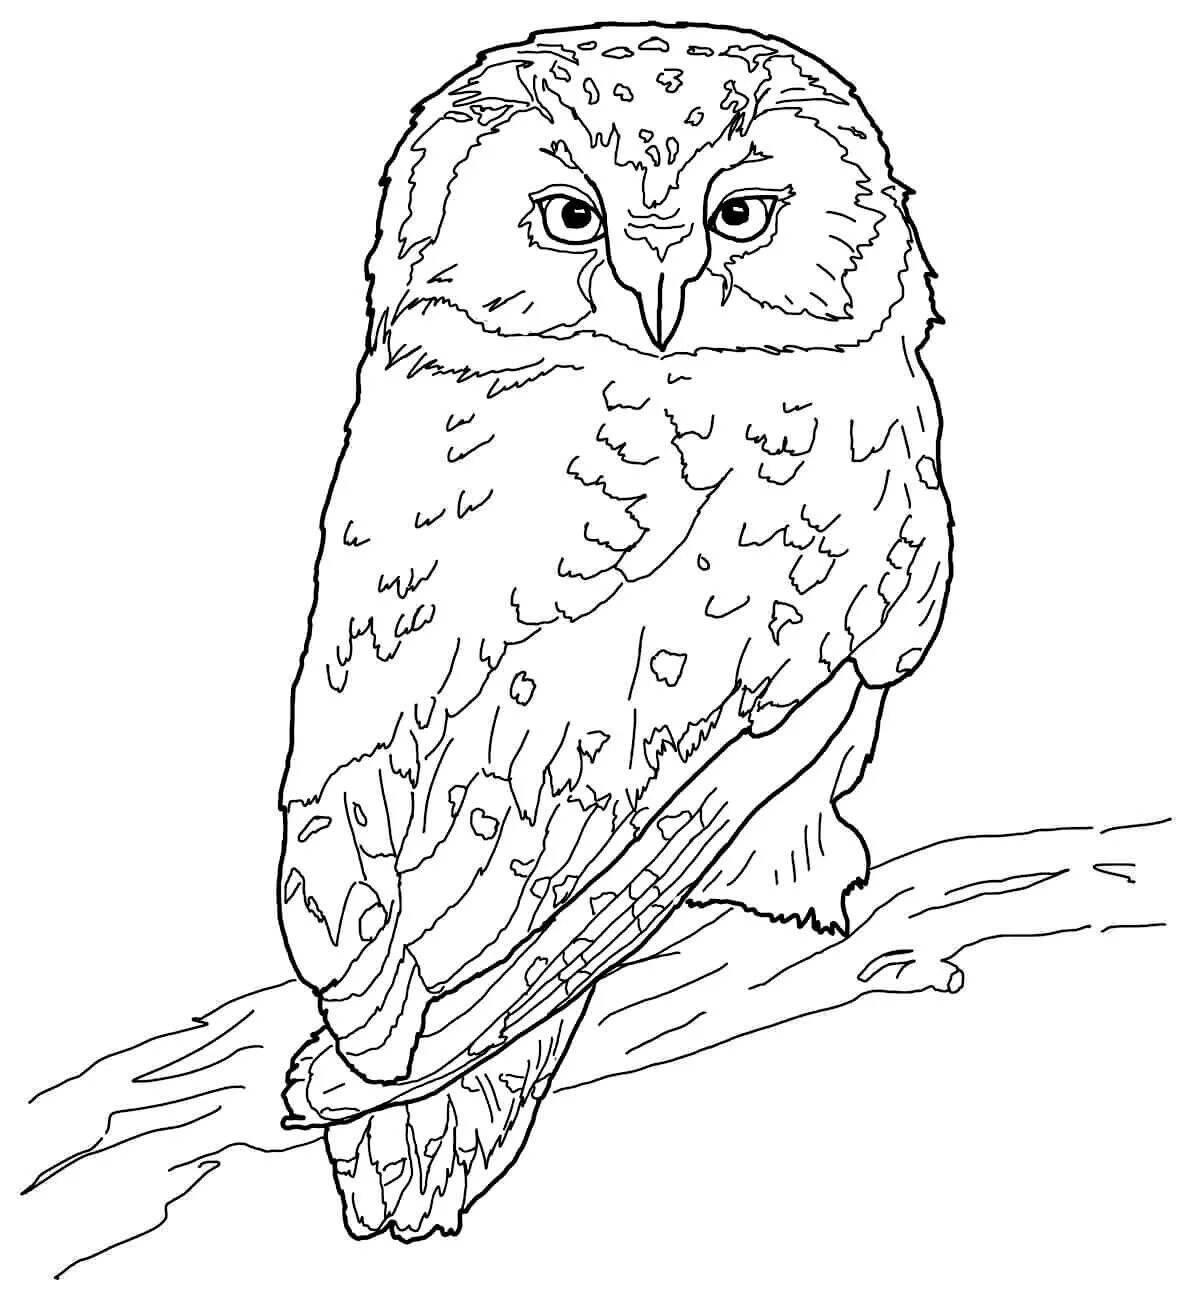 Coloring book bright eared owl